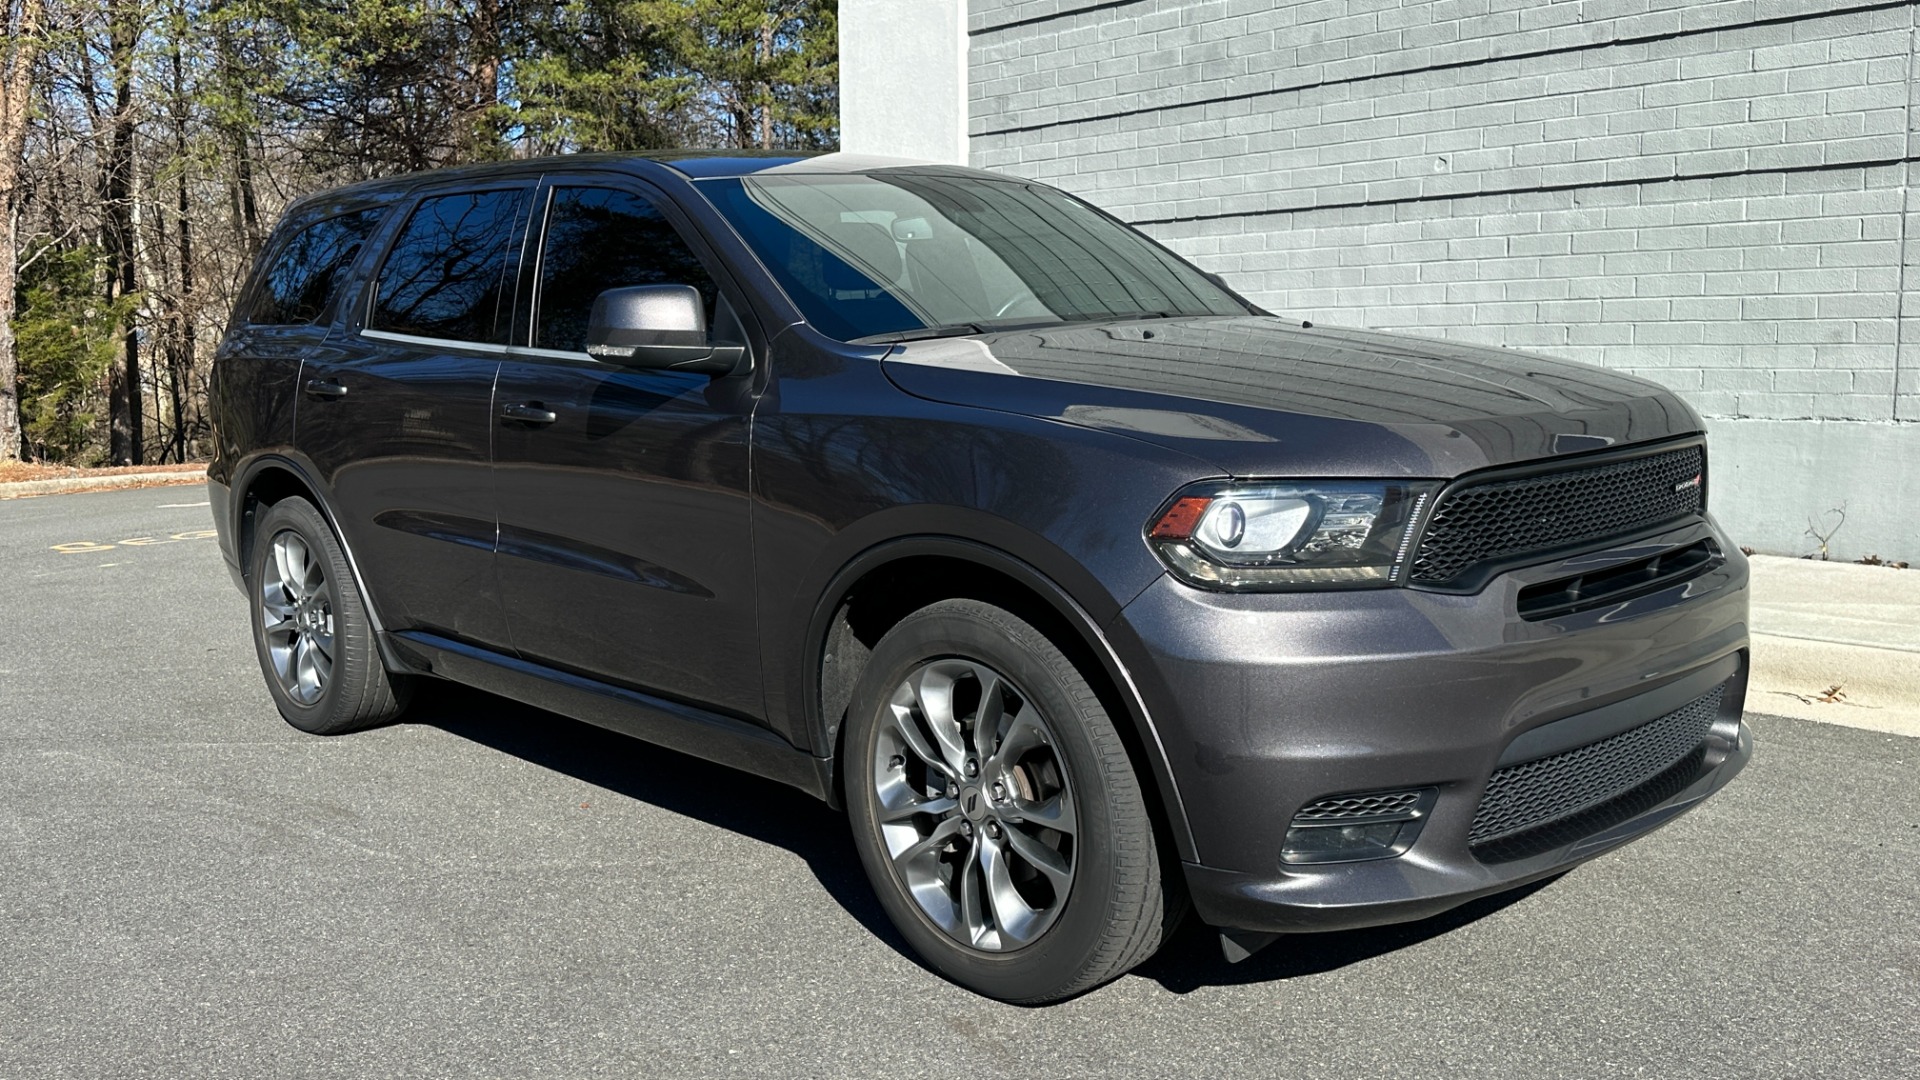 Used 2020 Dodge Durango GT PLUS / HEATED SEATS / SUEDE LEATHER / 3 ROW SEATING / REMOTE START for sale $27,995 at Formula Imports in Charlotte NC 28227 2